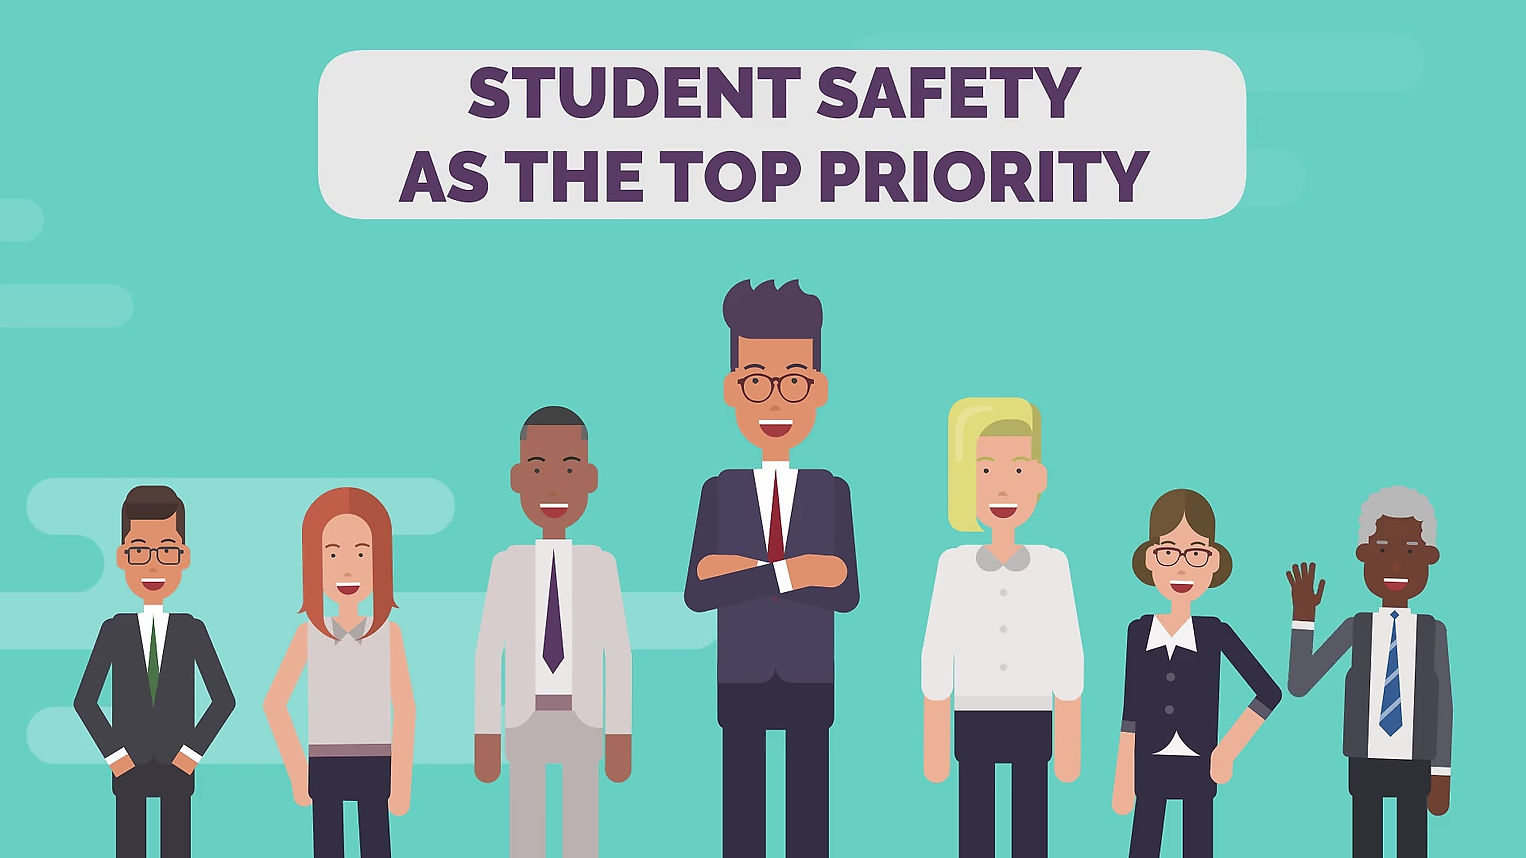 This is a great eLearning tool to keep students safe. Let's do it!